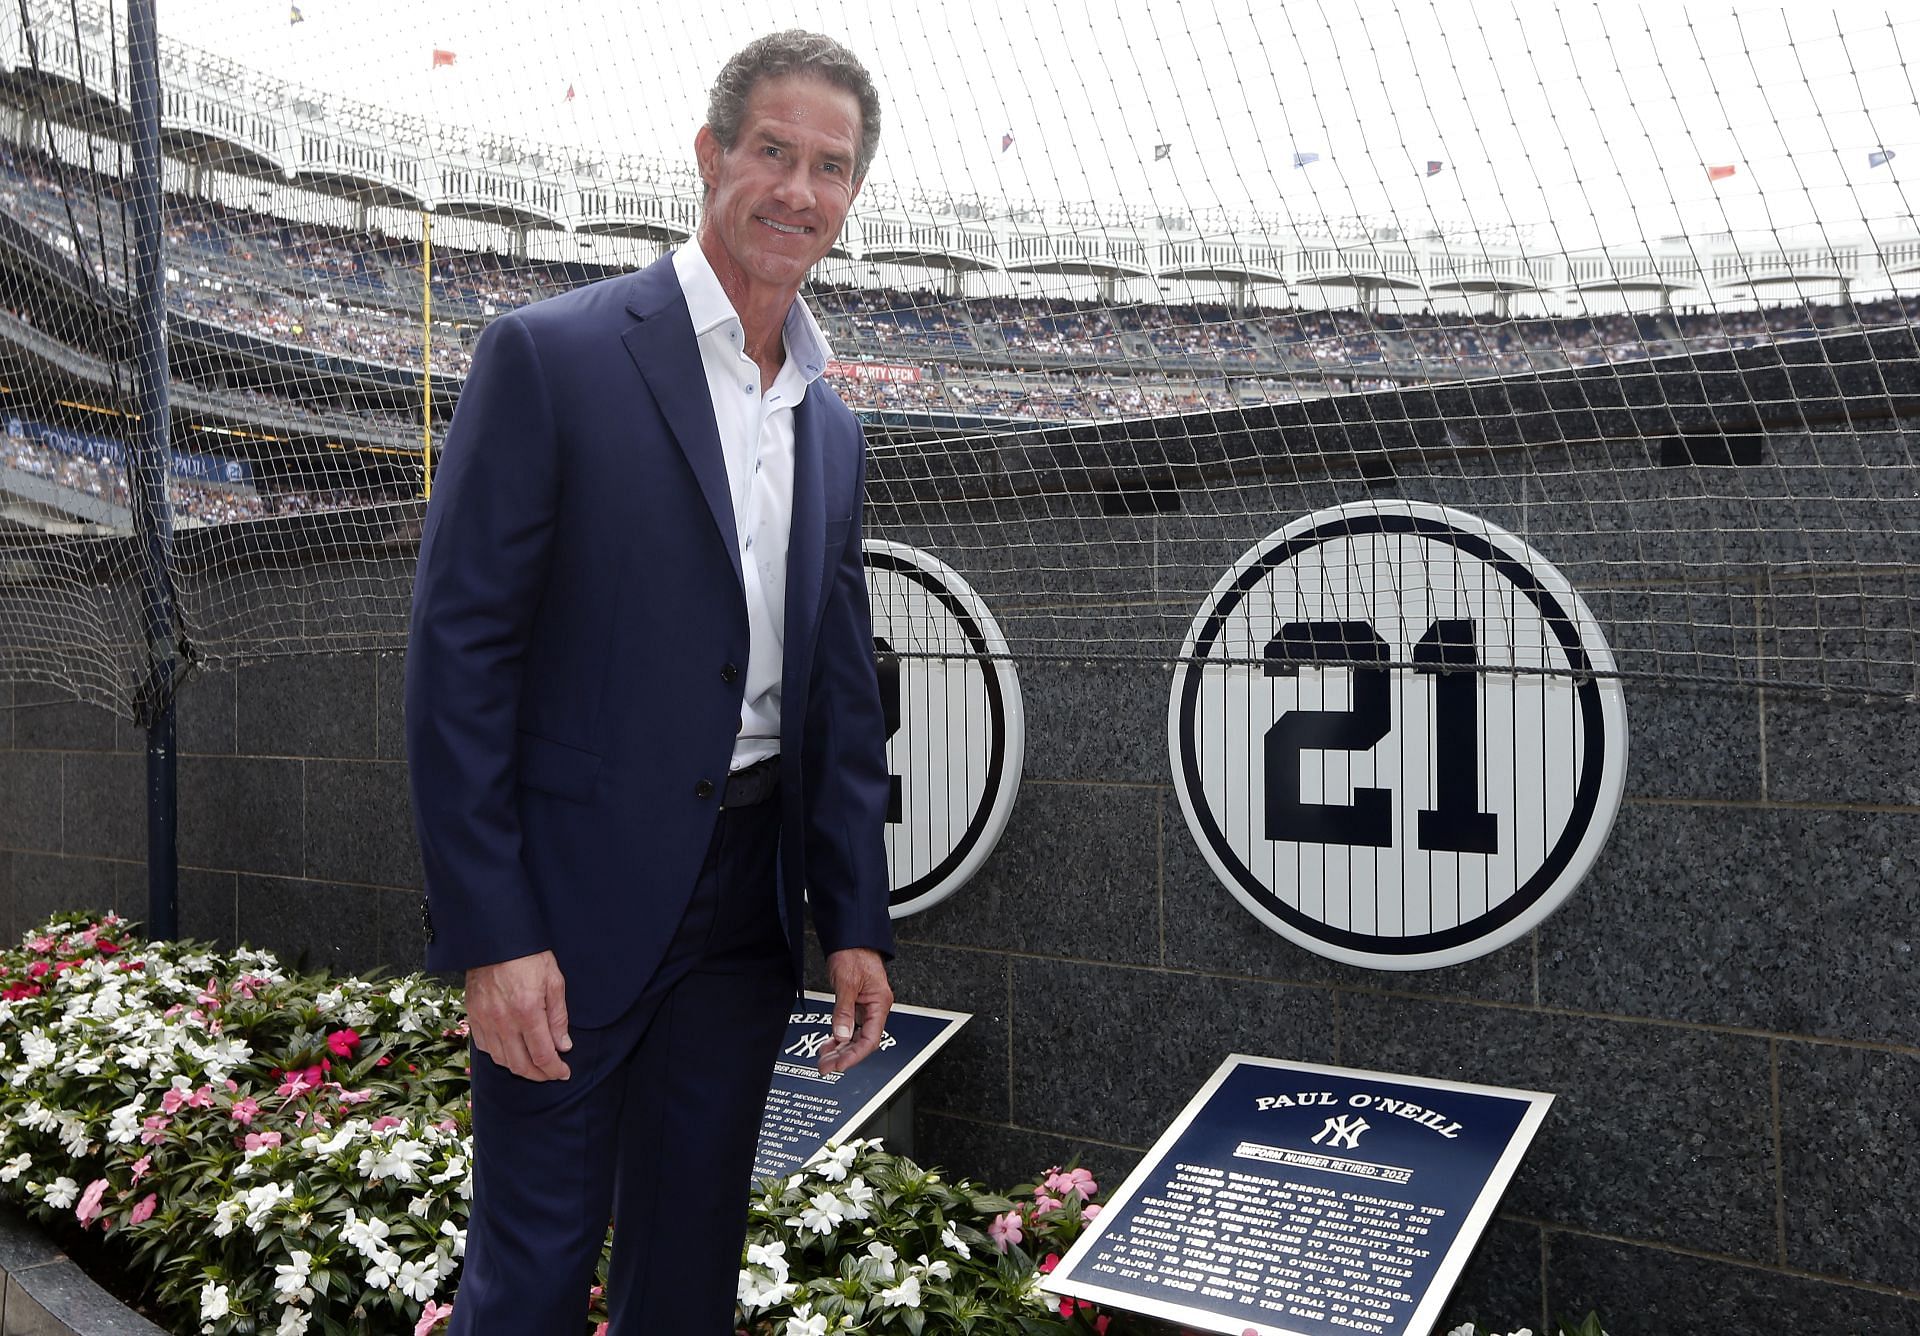 Former teammates, coaches weigh in on Paul O'Neill ahead of Yankees' number  retirement